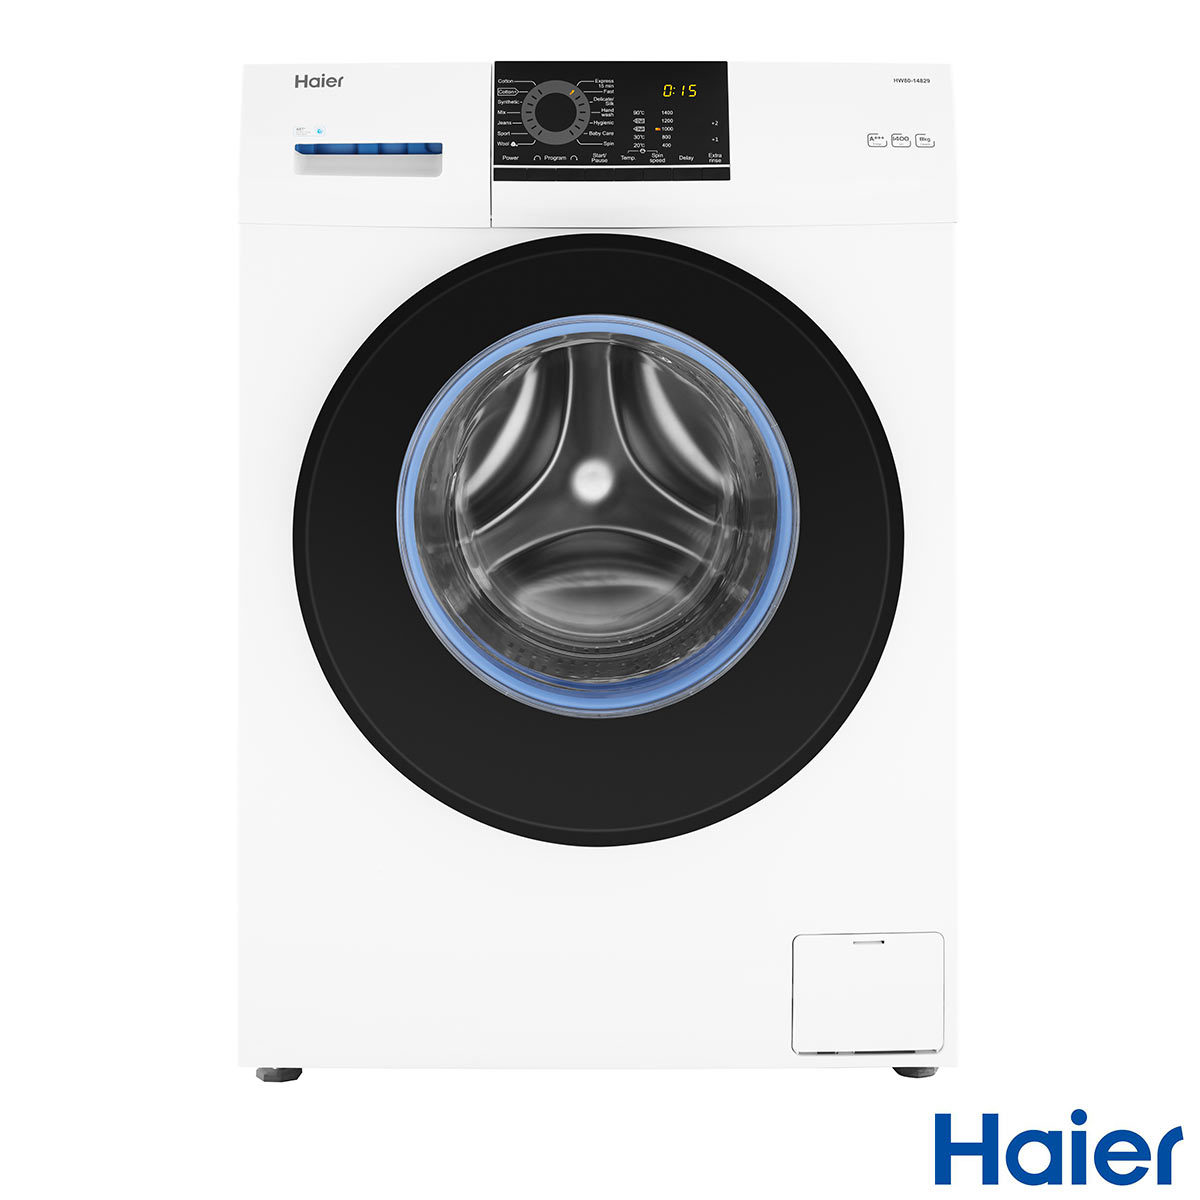 Haier HW80-14829, 8kg, 1400rpm Washing Machine A+++ Rated in White